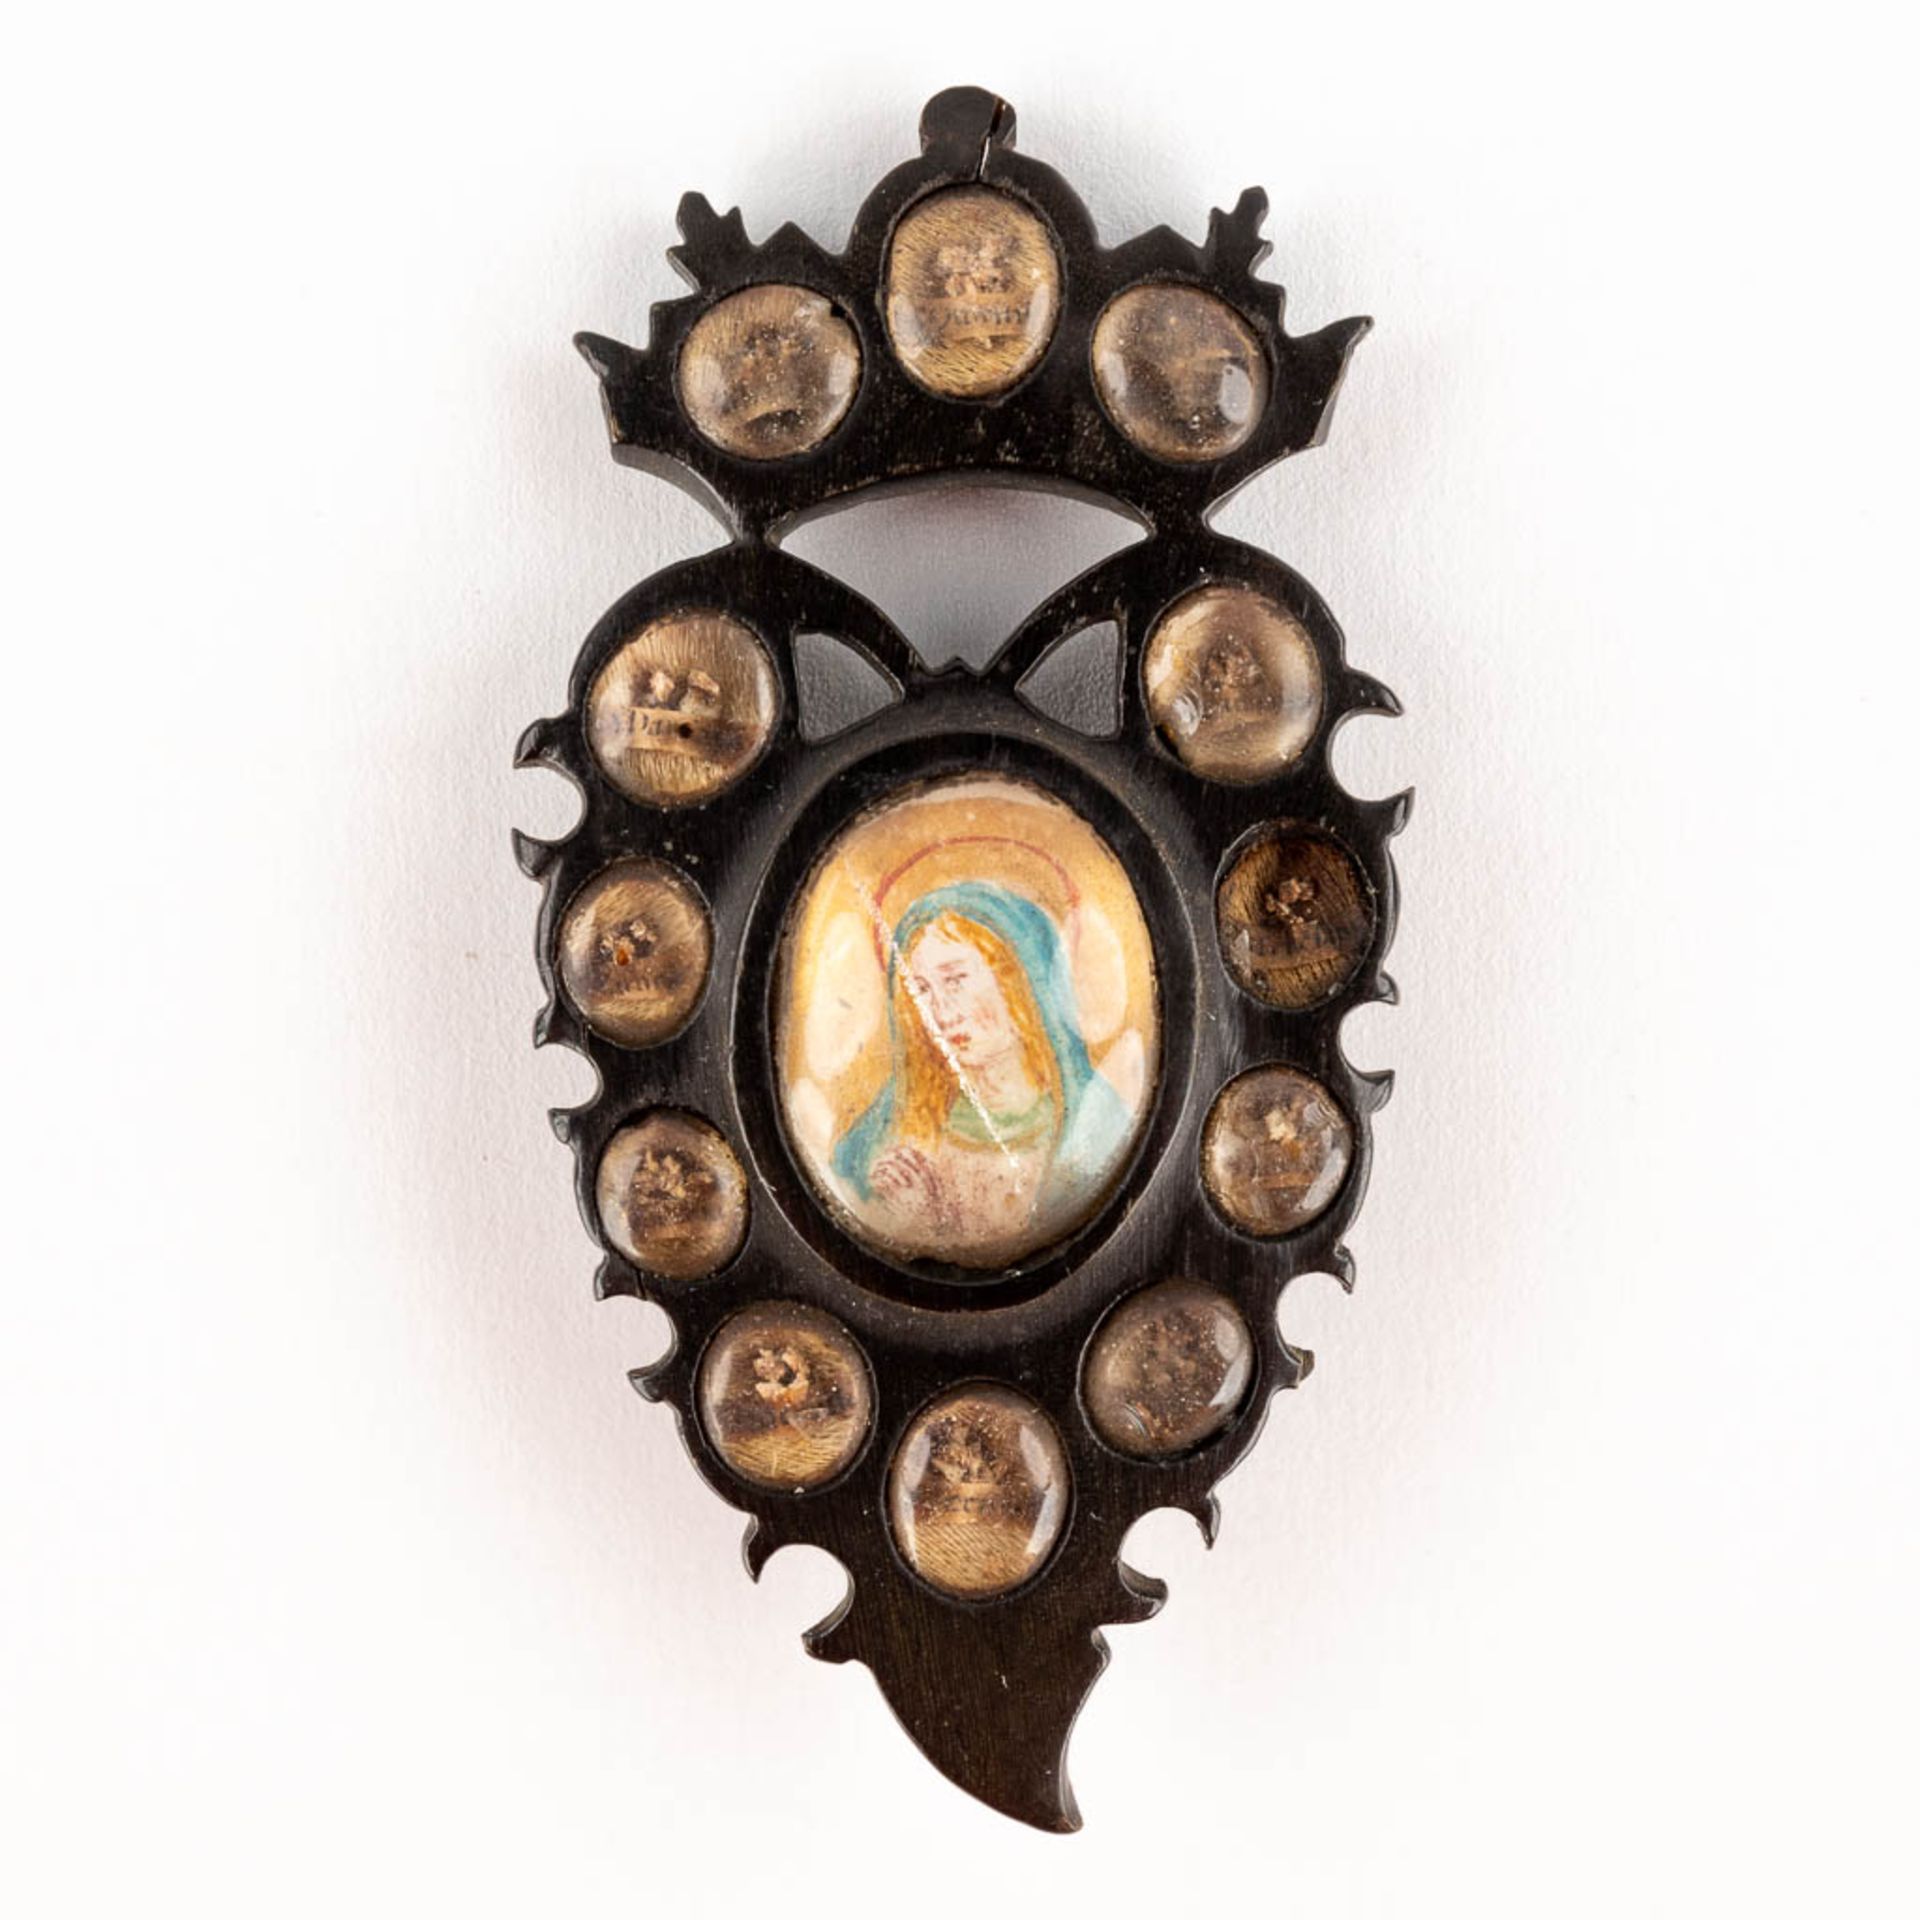 A small collection of relics and reliquary items, The Veil of Veronica, a relic in the shape of a sa - Image 3 of 11